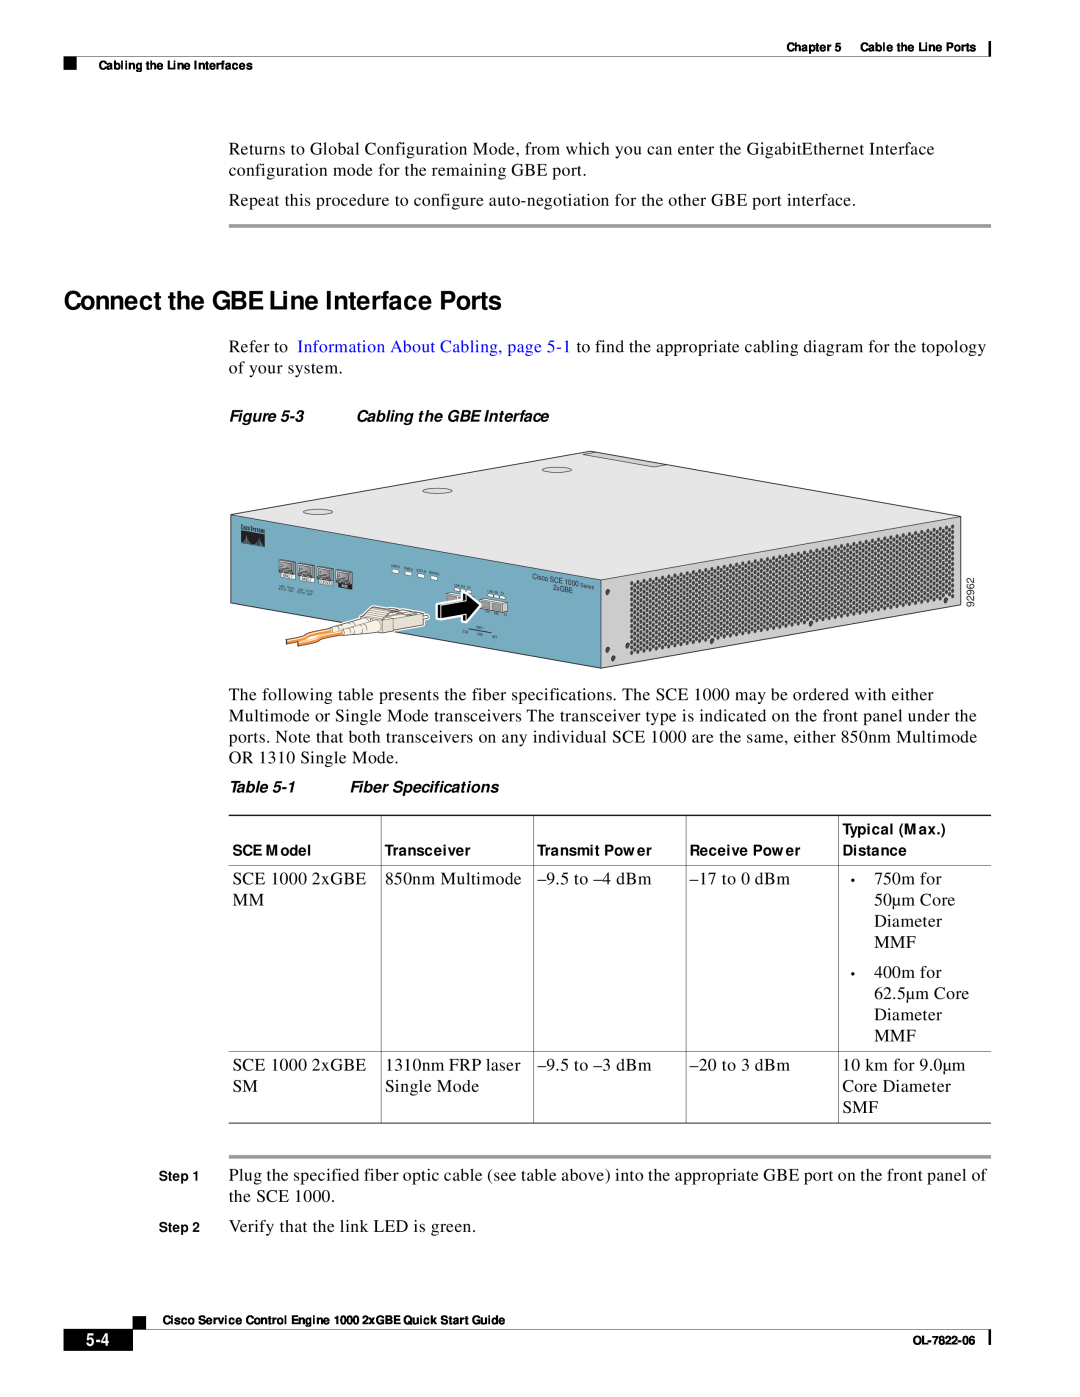 Cisco Systems OL-7822-06 Connect the GBE Line Interface Ports, Typical Max, SCE Model, Transceiver, Transmit Power 